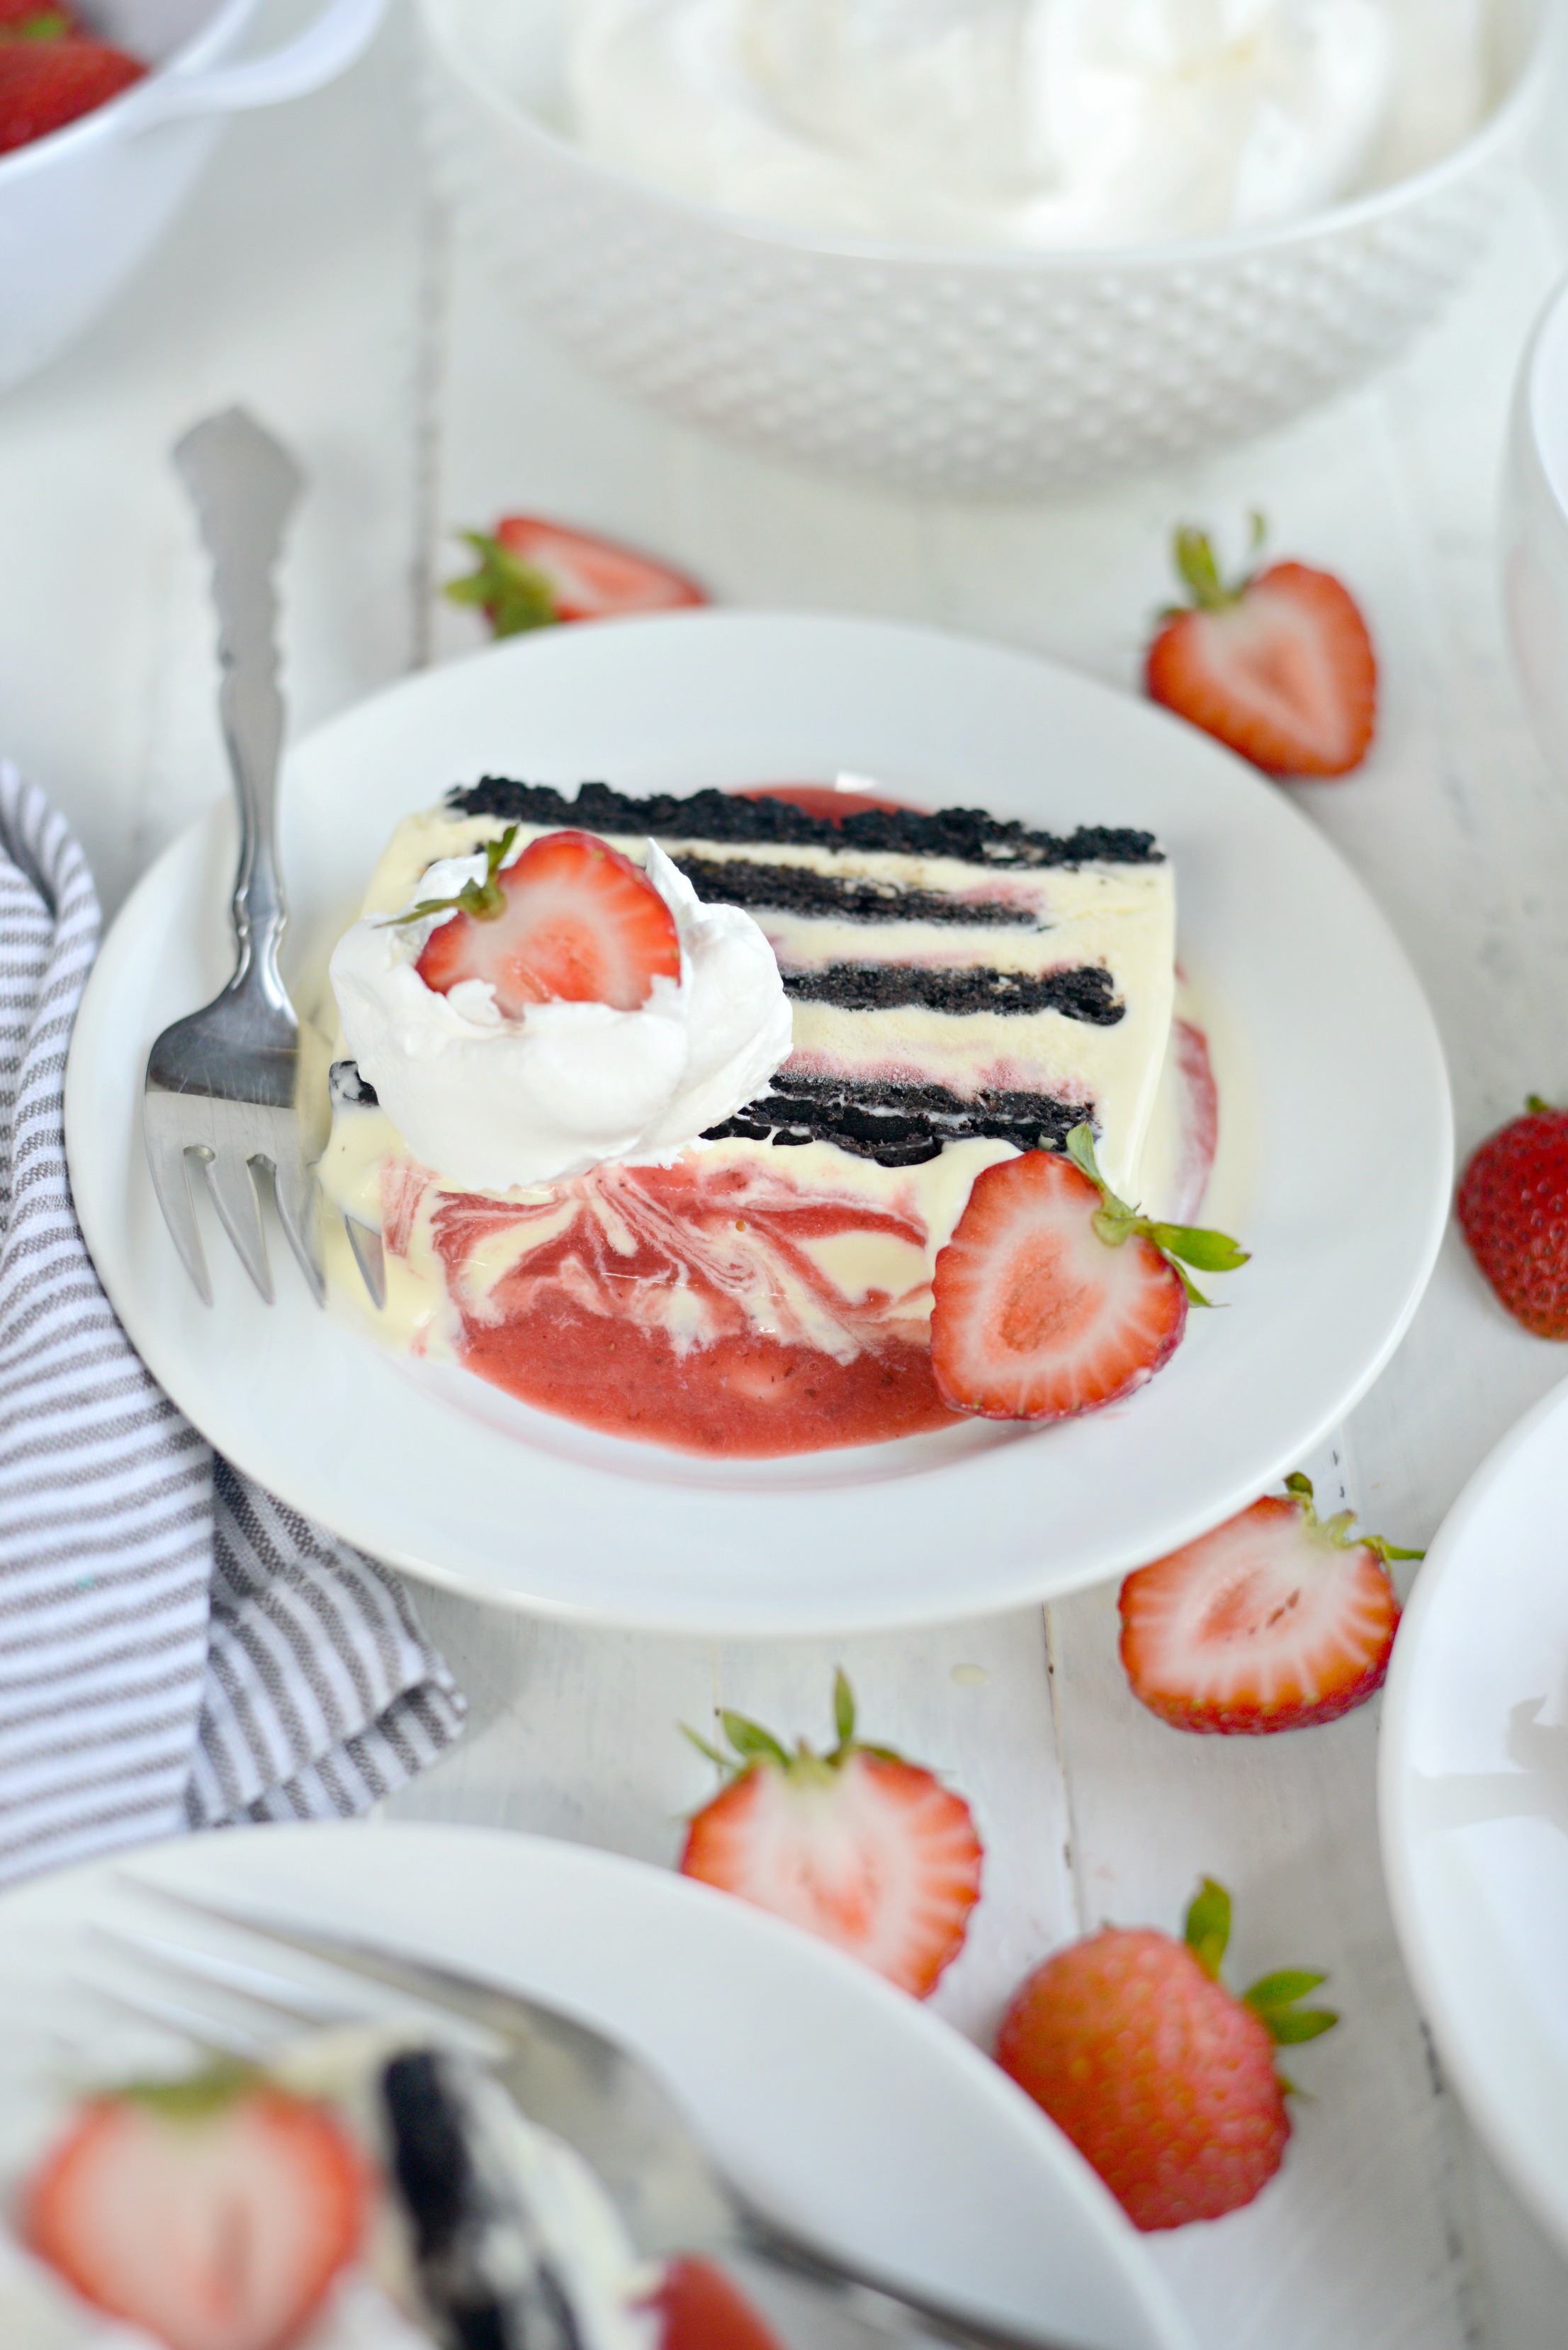 https://www.simplyscratch.com/wp-content/uploads/2017/06/Strawberry-Swirl-Mascarpone-Ice-Cream-Cookie-Cake-with-Pampered-Chef-l-SimplyScratch.com-40.jpg